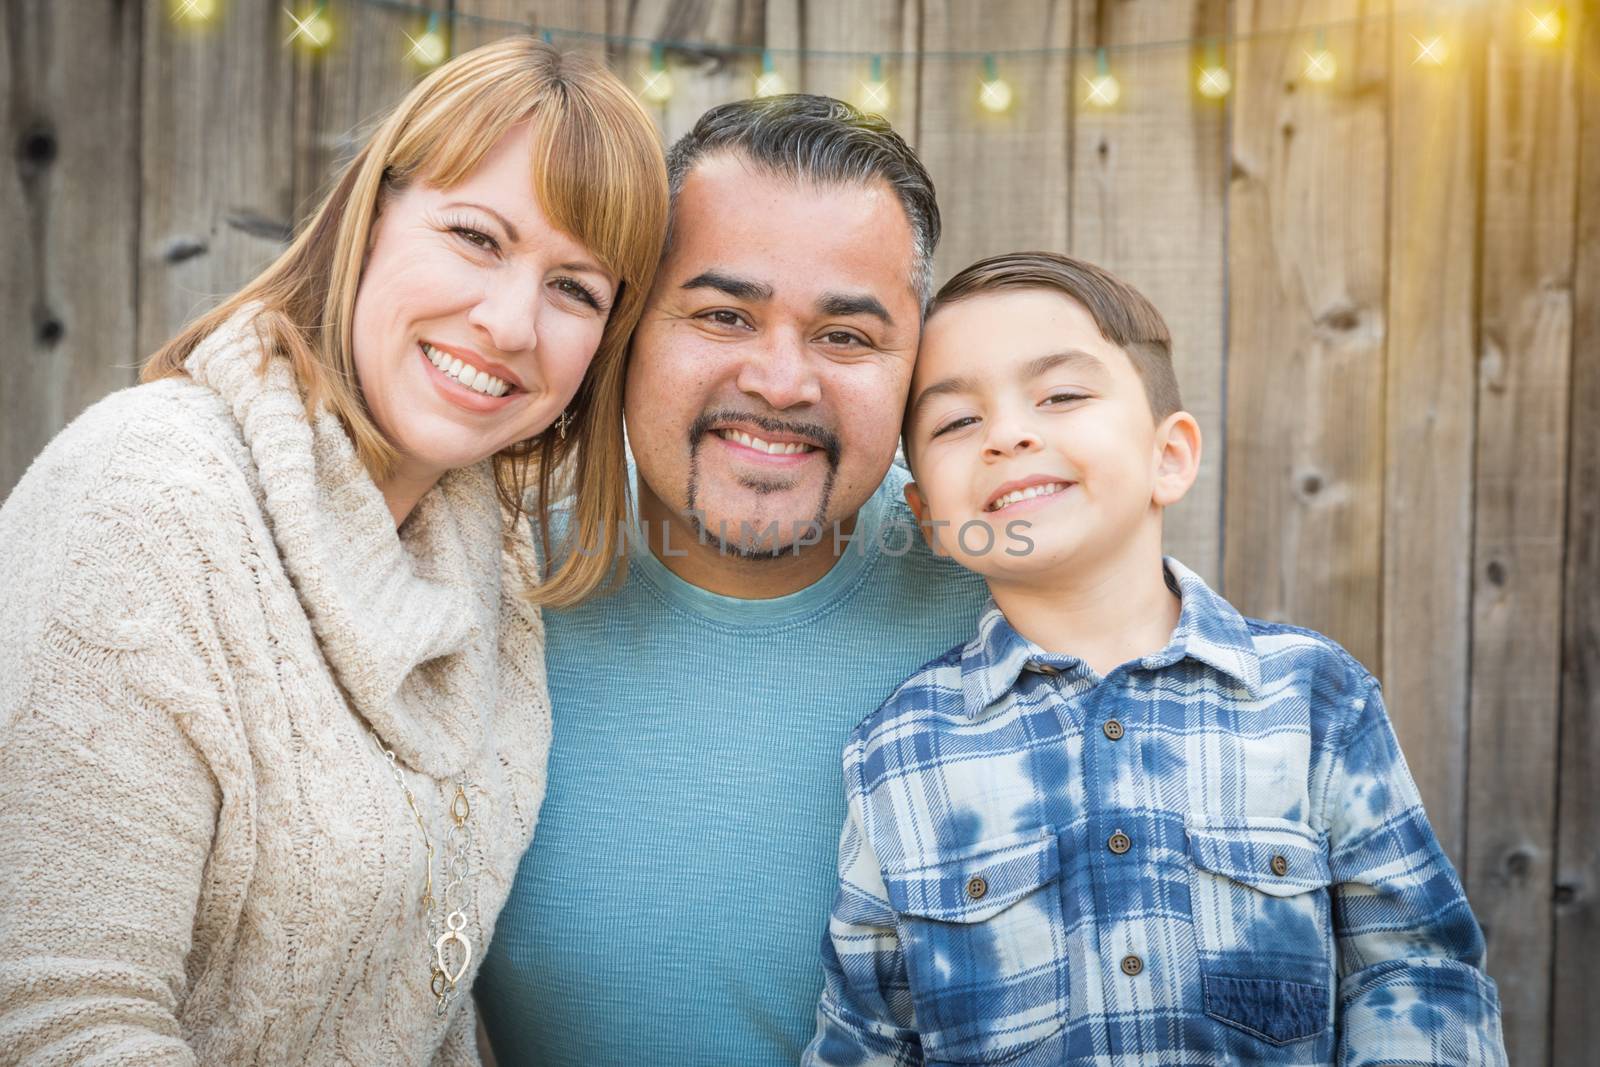 Young Mixed Race Family Portrait Outside by Feverpitched